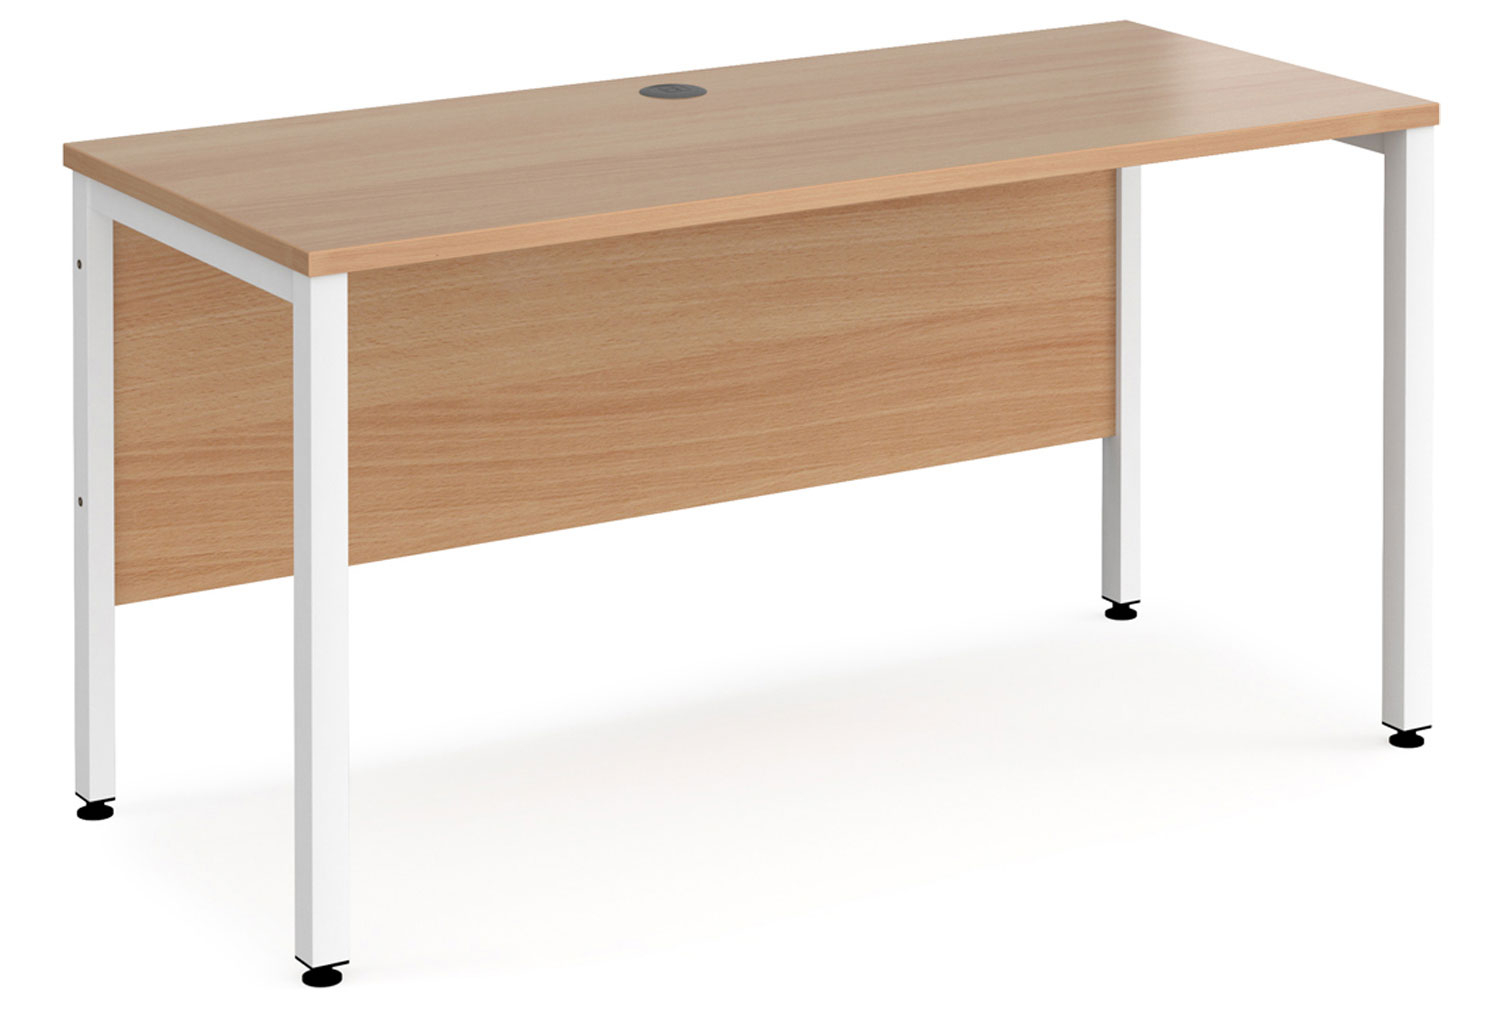 Value Line Deluxe Bench Narrow Rectangular Office Desks (White Legs), 140wx60dx73h (cm), Beech, Express Delivery